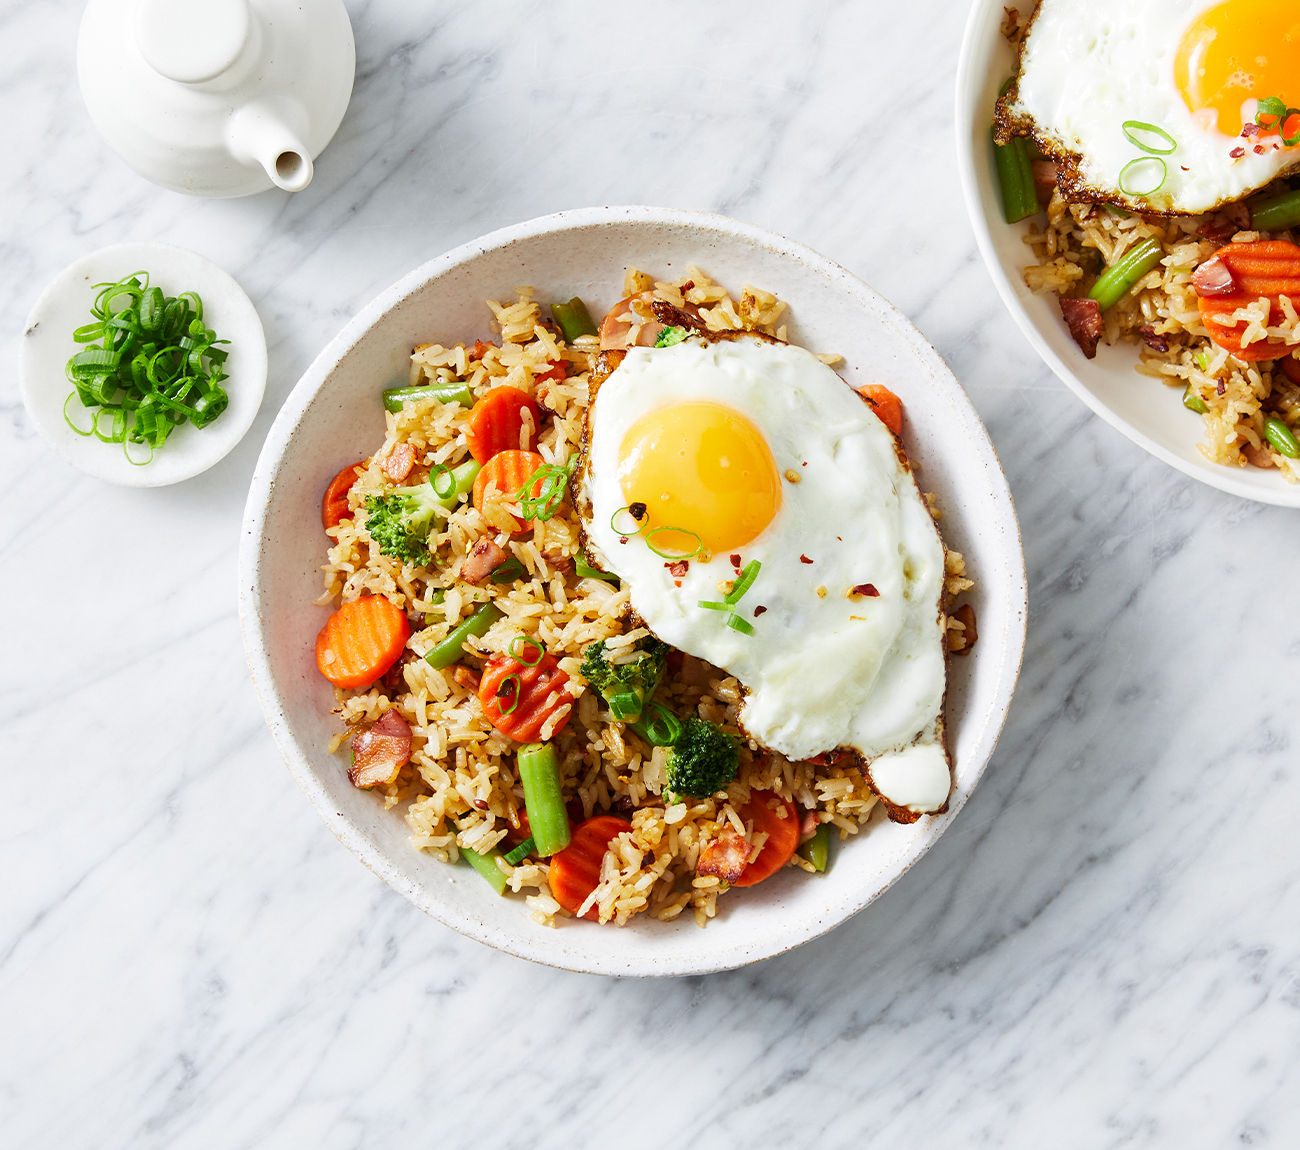 Crispy Bacon And Veg Fried Rice Recipe | Woolworths